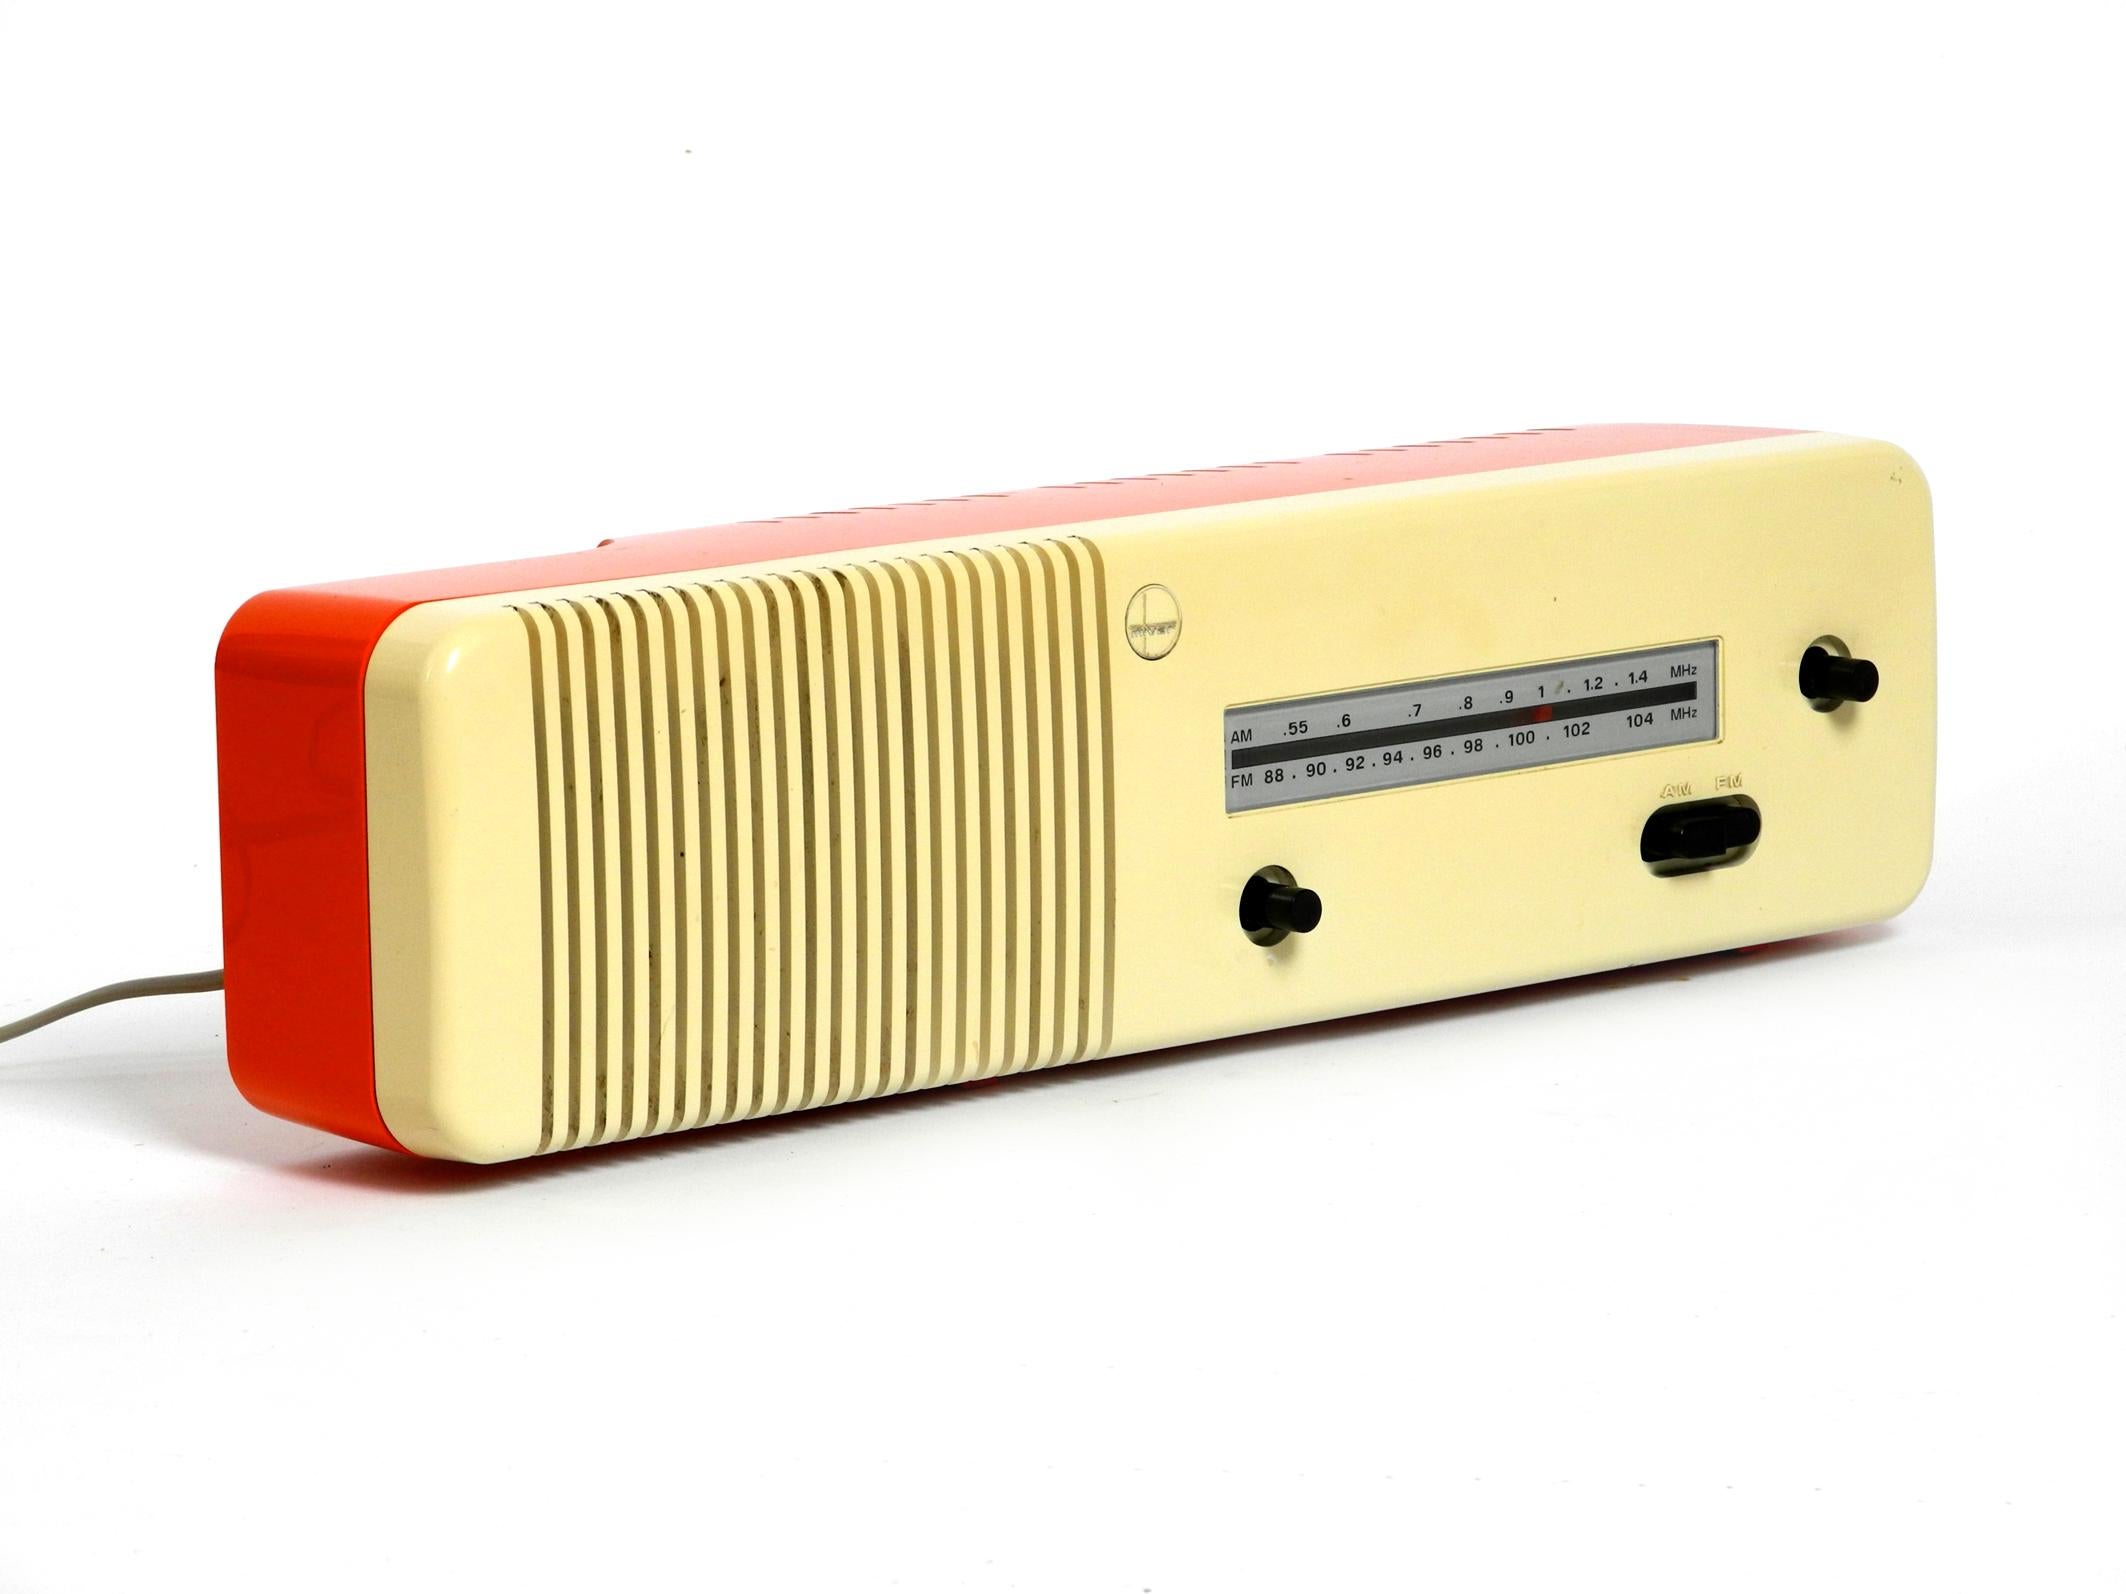 Extremely rare MIVAR FM / MW radio MOD. R45 from the 1960s. 
Great Minimalist Pop Art Space Age Design. 
Made Italy. In absolute top collectors condition. 
This radio is very rare and barely found in this state of condition.
Very good reception